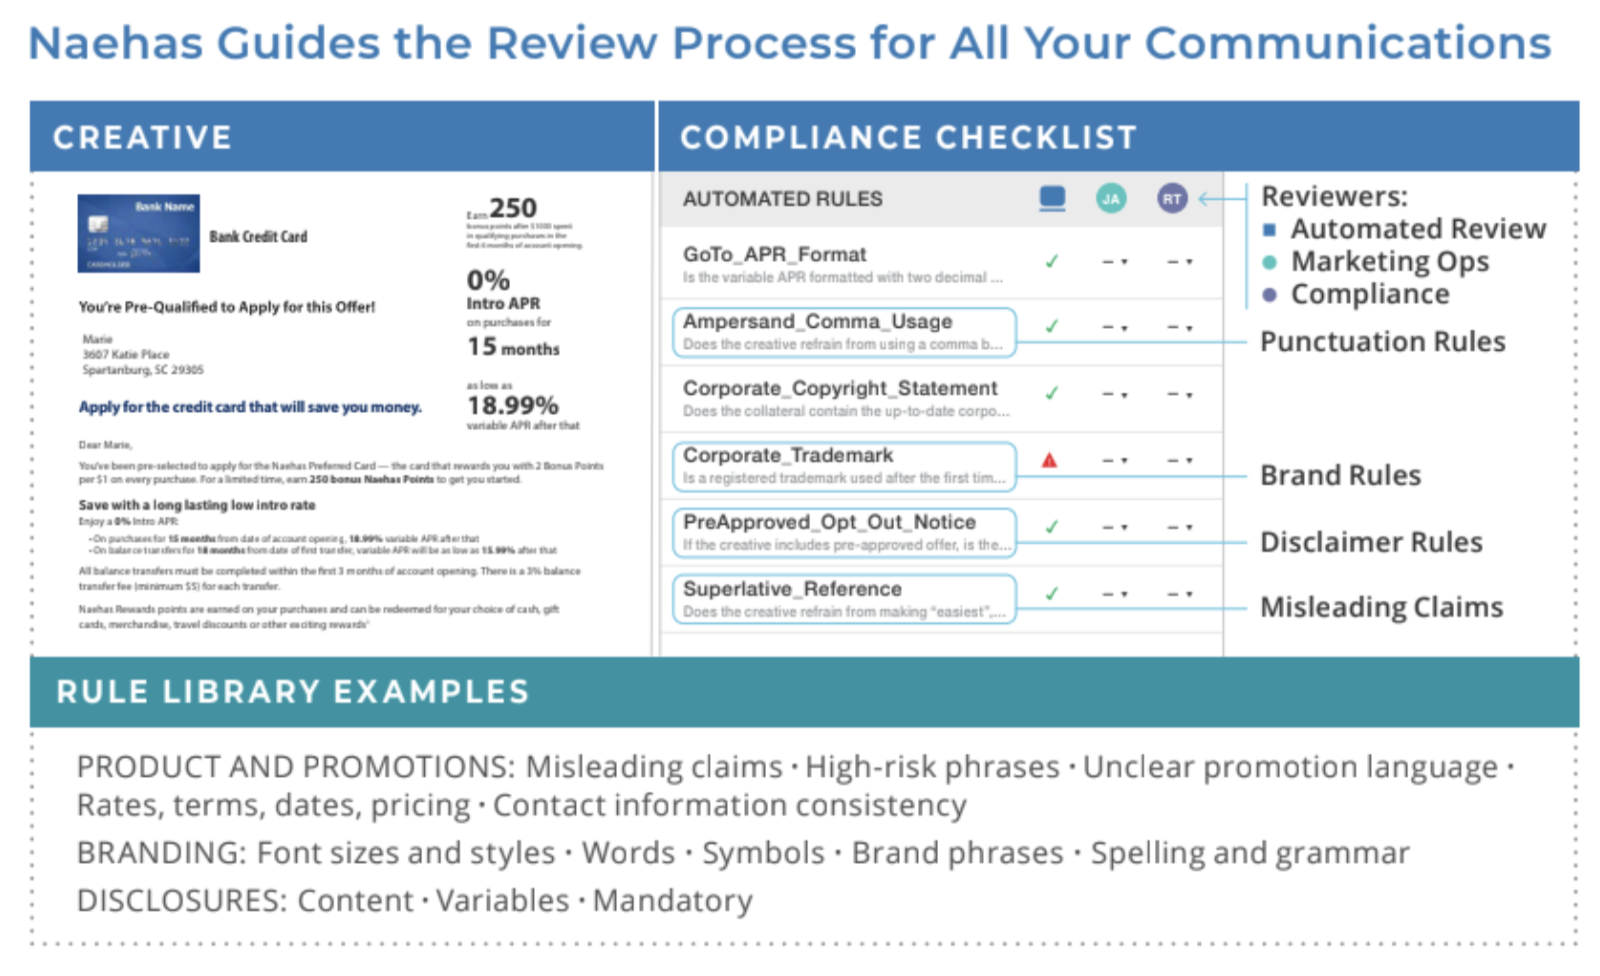 naehas guides the review process for all your communications